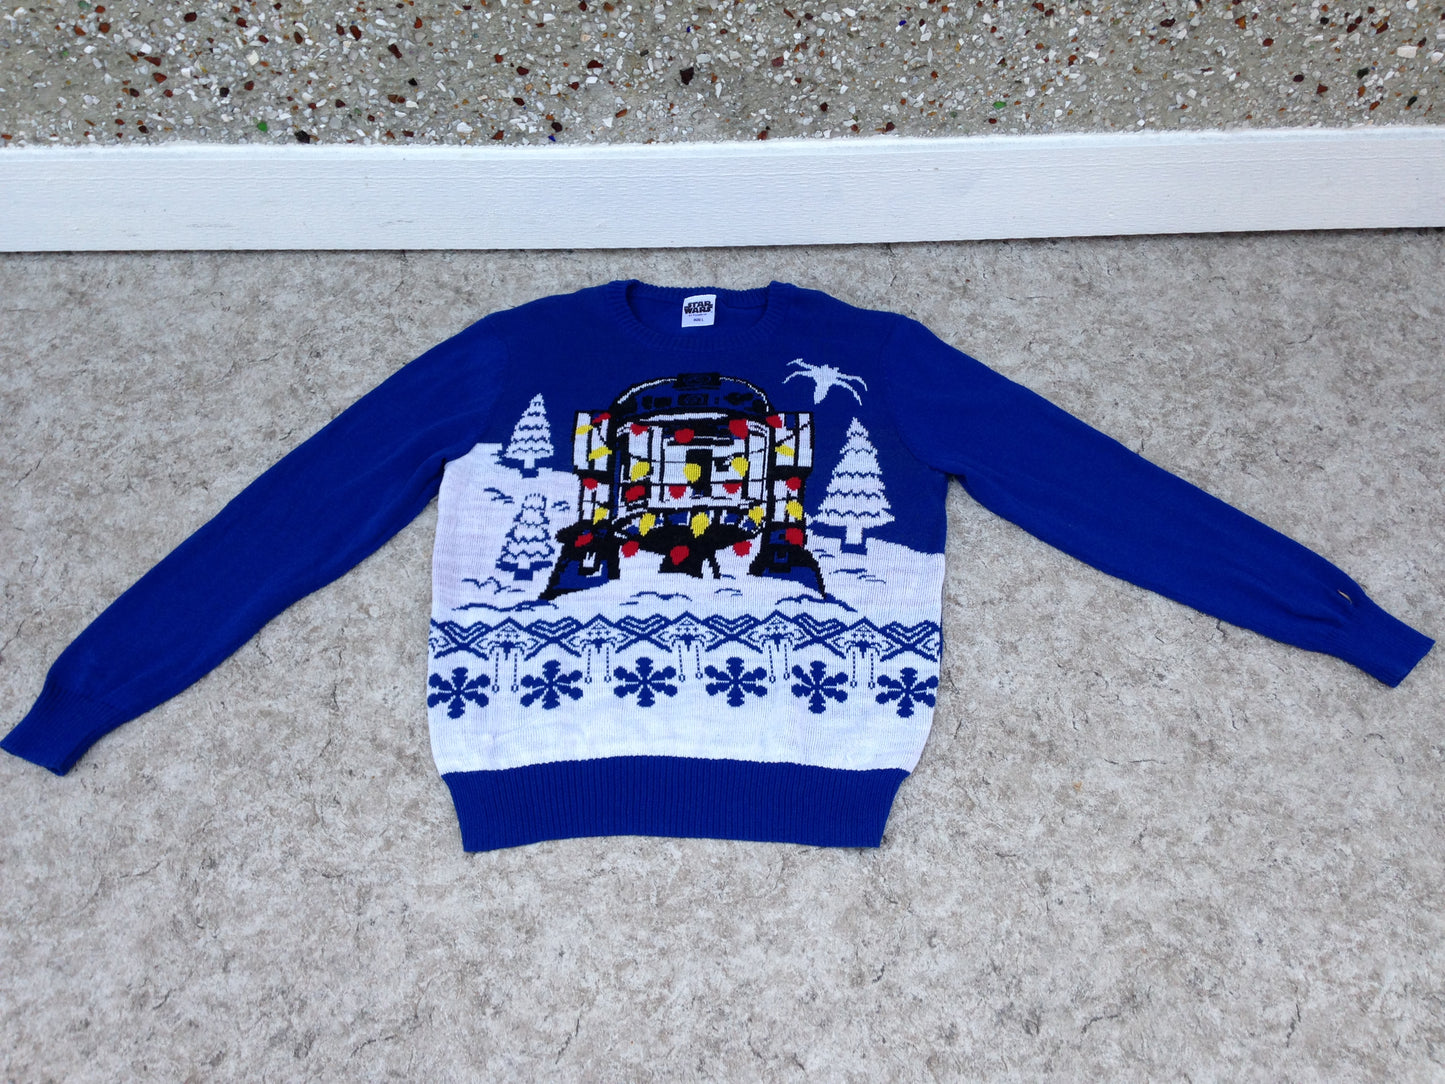 Winter Sweater Men's Size Large  Ugly Christmas Sweater Star Wars R2D2 Blue White New Demo